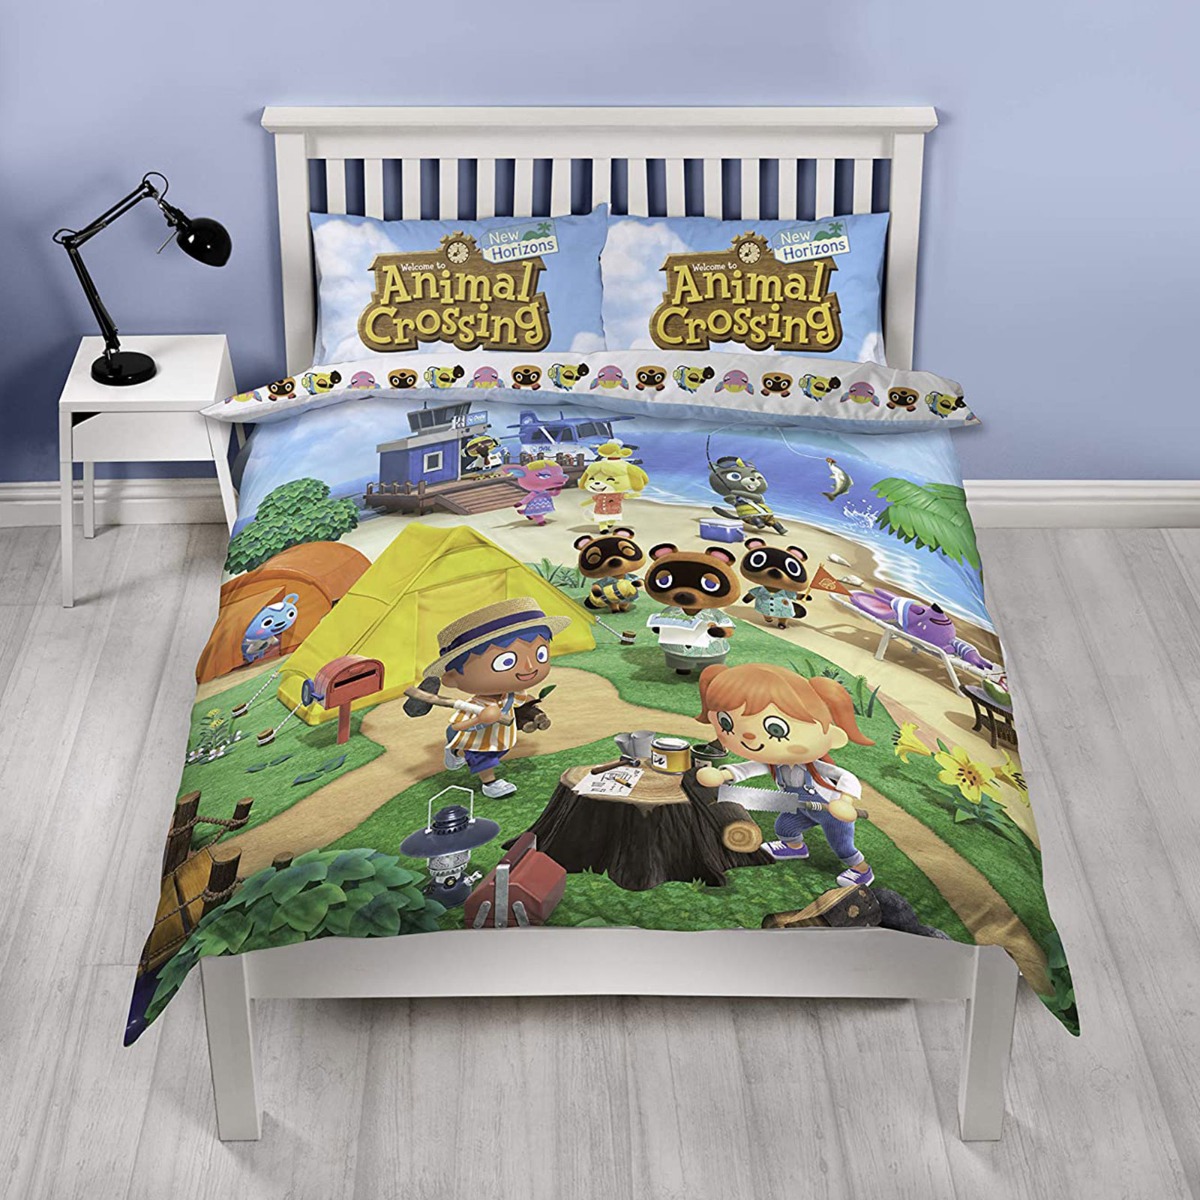 Animal Crossing Double Duvet Cover and Pillowcase Set